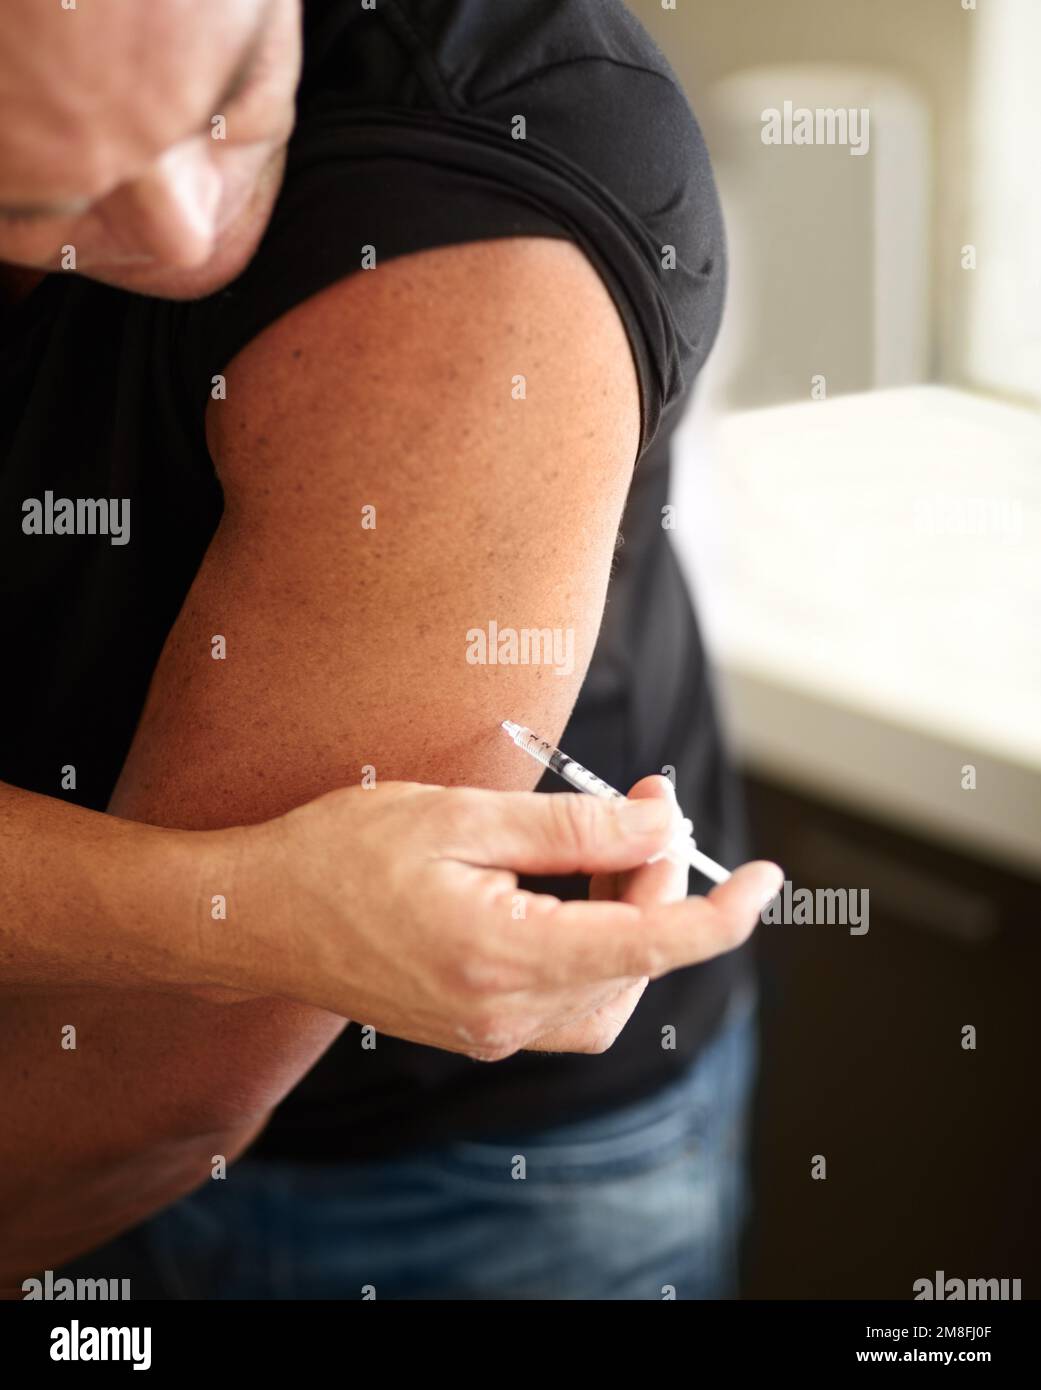 Using performance enhancing drugs. Closeup of a muscular man injecting himself with steroids. Stock Photo